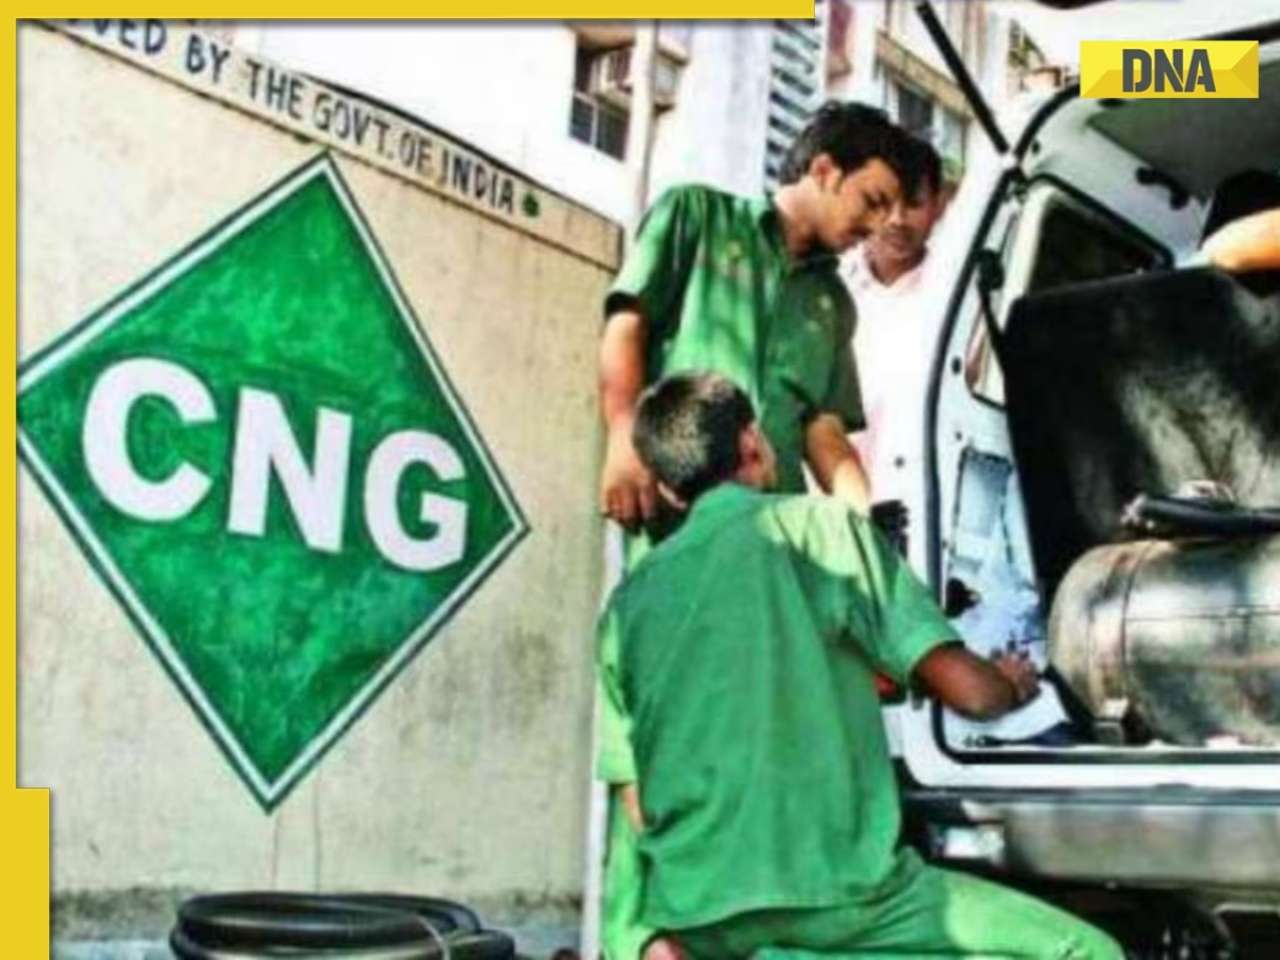 CNG prices in Delhi slashed by Rs 2.5 per kg, check new rates